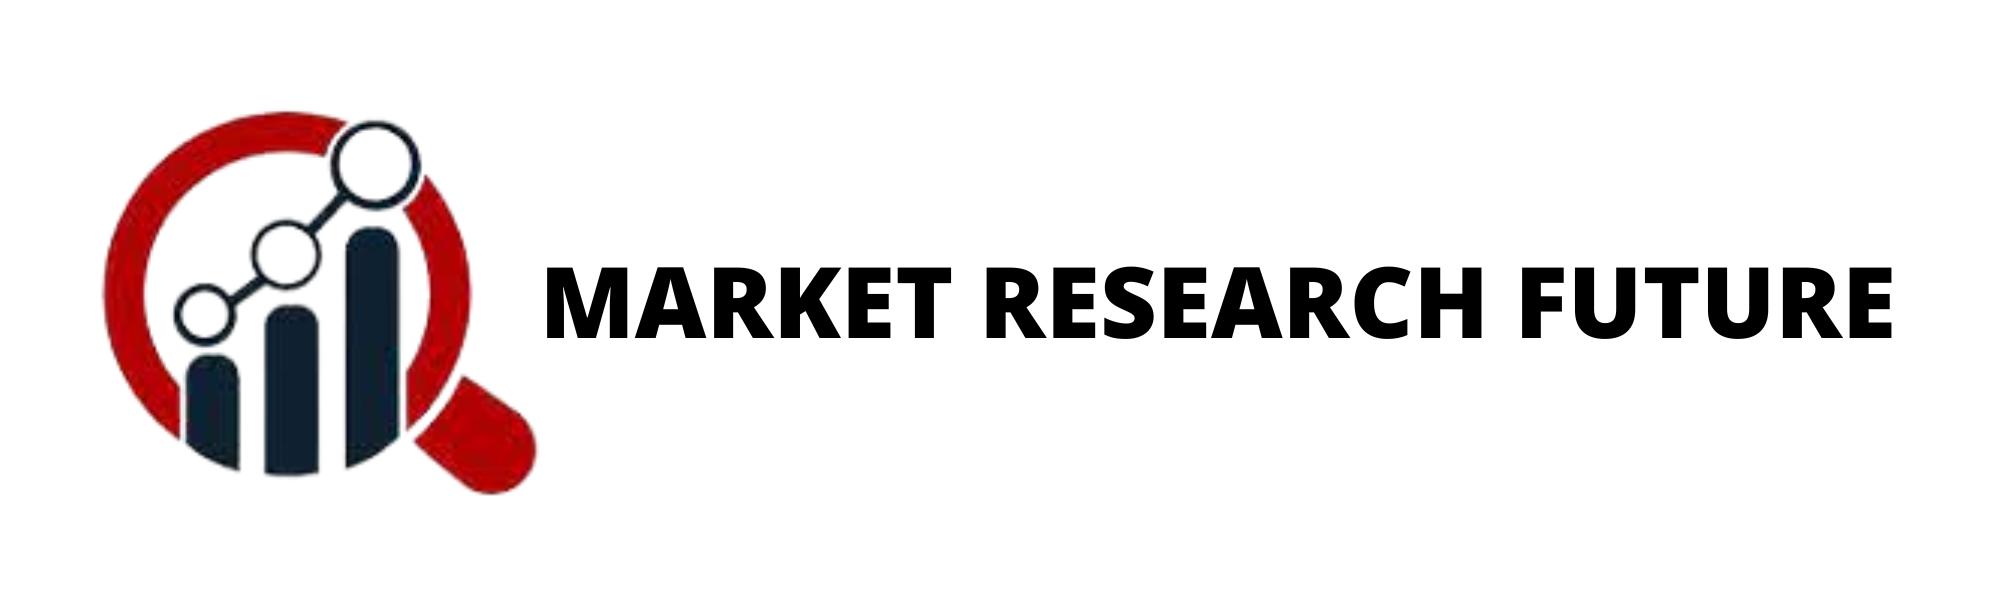 Thermoplastic Honeycomb Market Demand May Set New Growth Story...